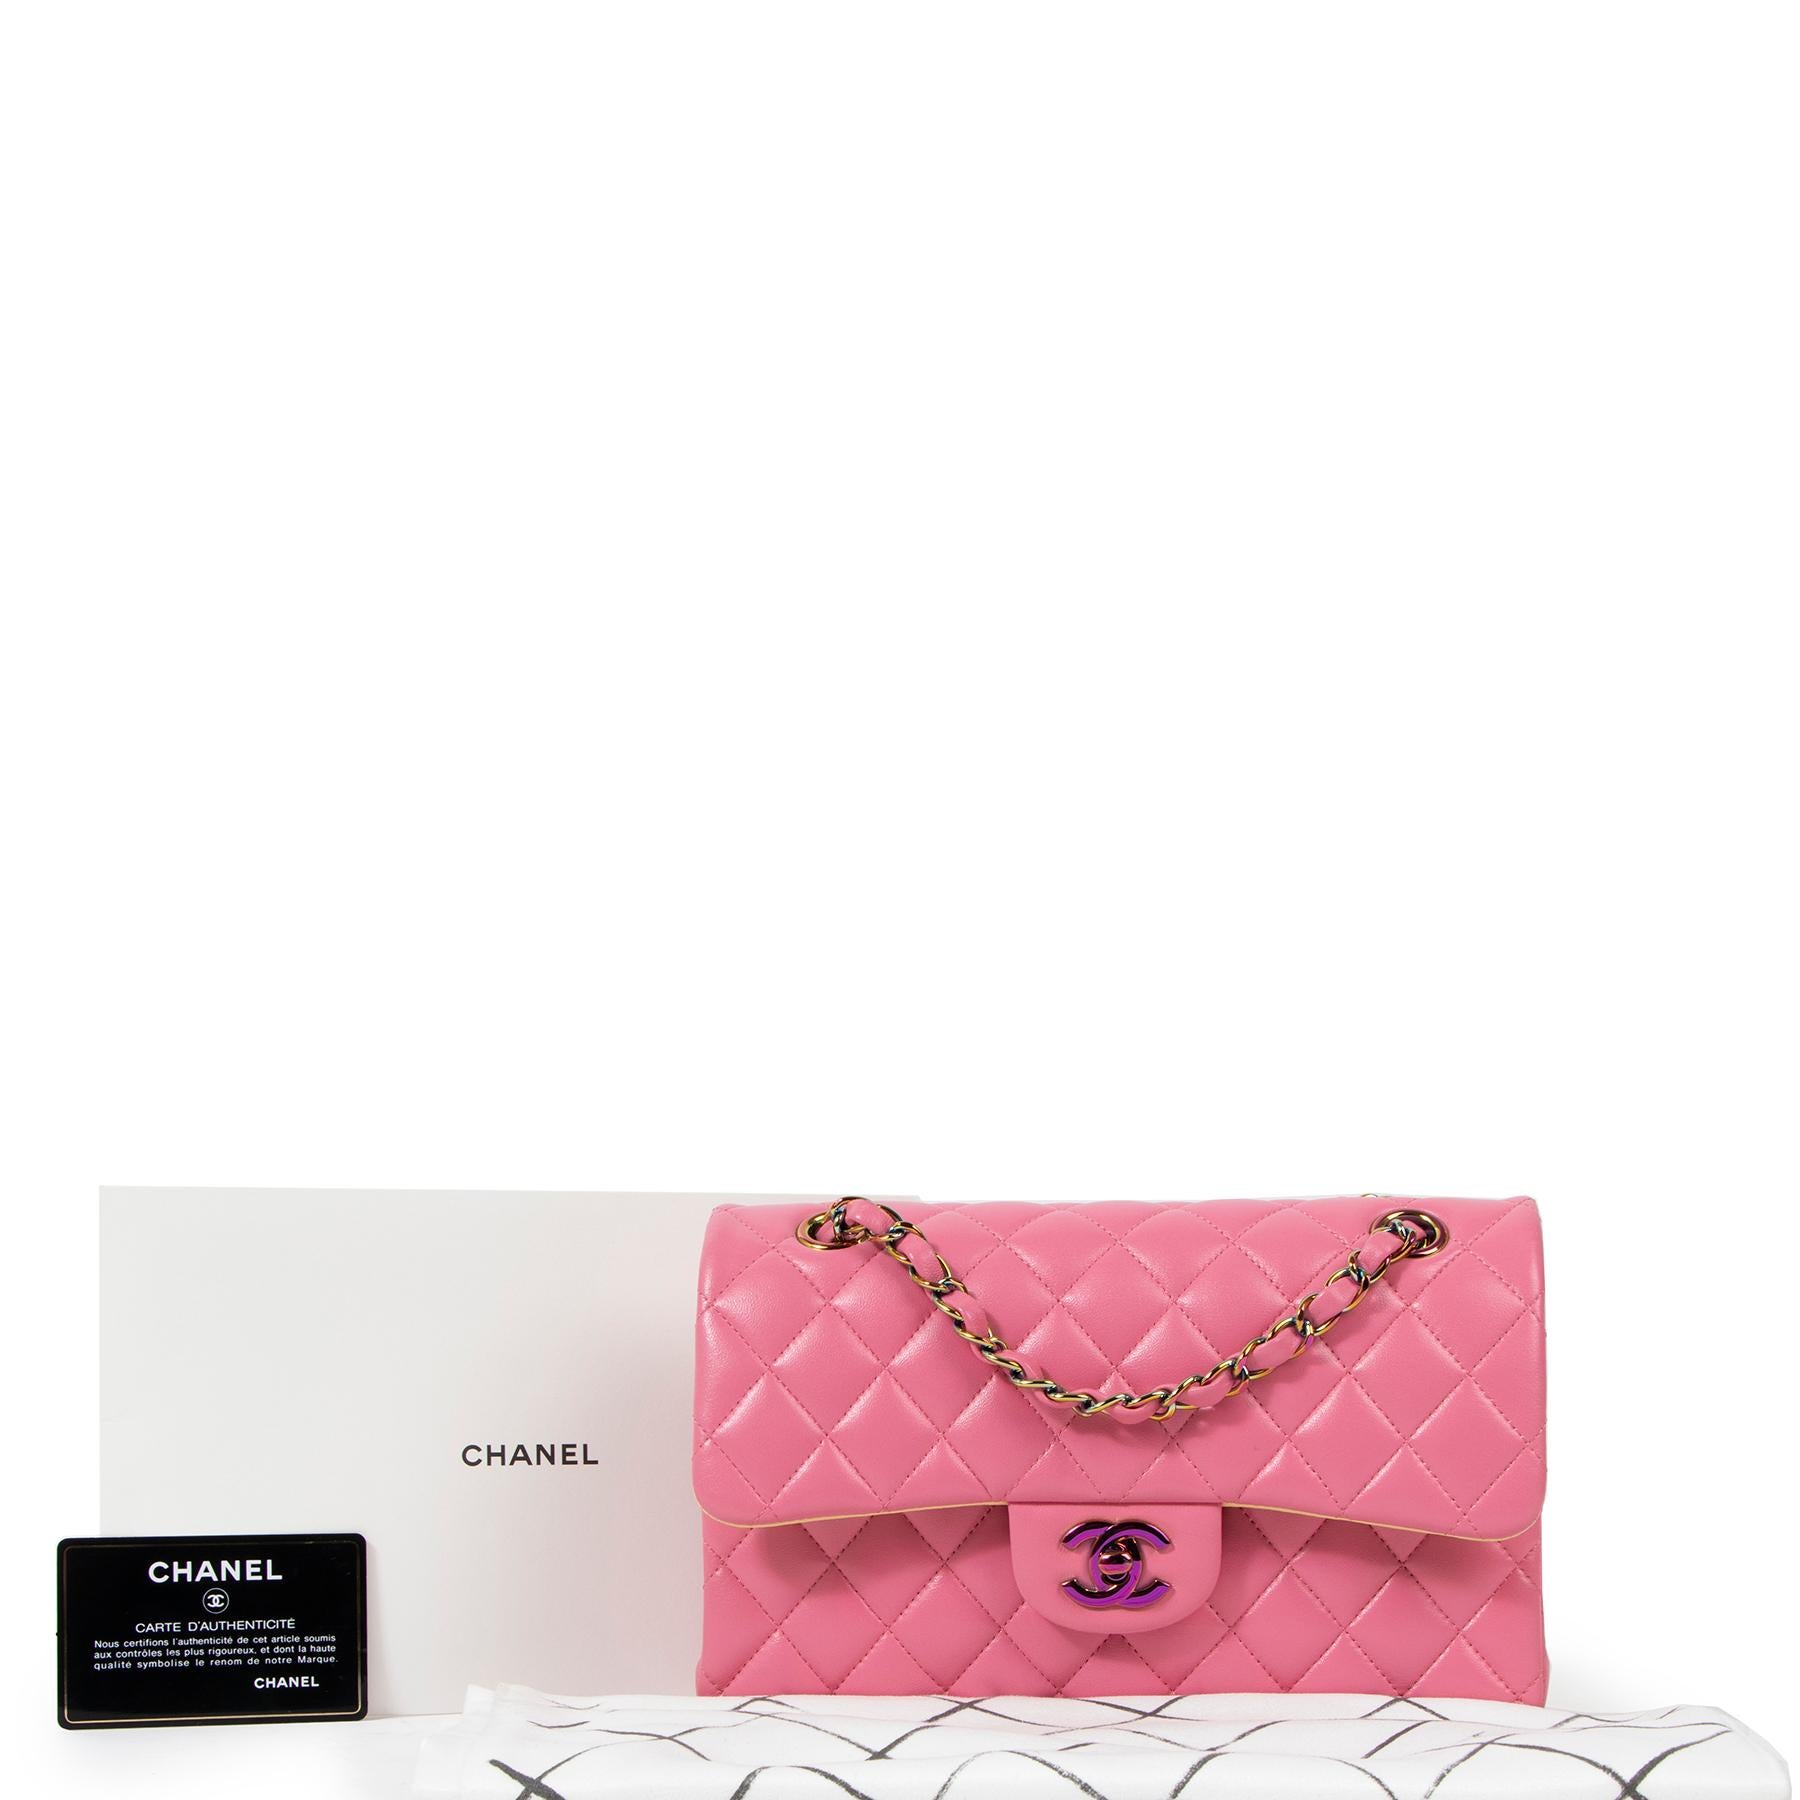 Chanel Spring 2021 Pink Small Rainbow Classic Flap Bag

The iconic Chanel Classic Flap Bag is totally reimagined, this Rainbow edition Classic Flap Bag has the unique metal hardware: it’s beautified in rainbow hologram shade that shines and